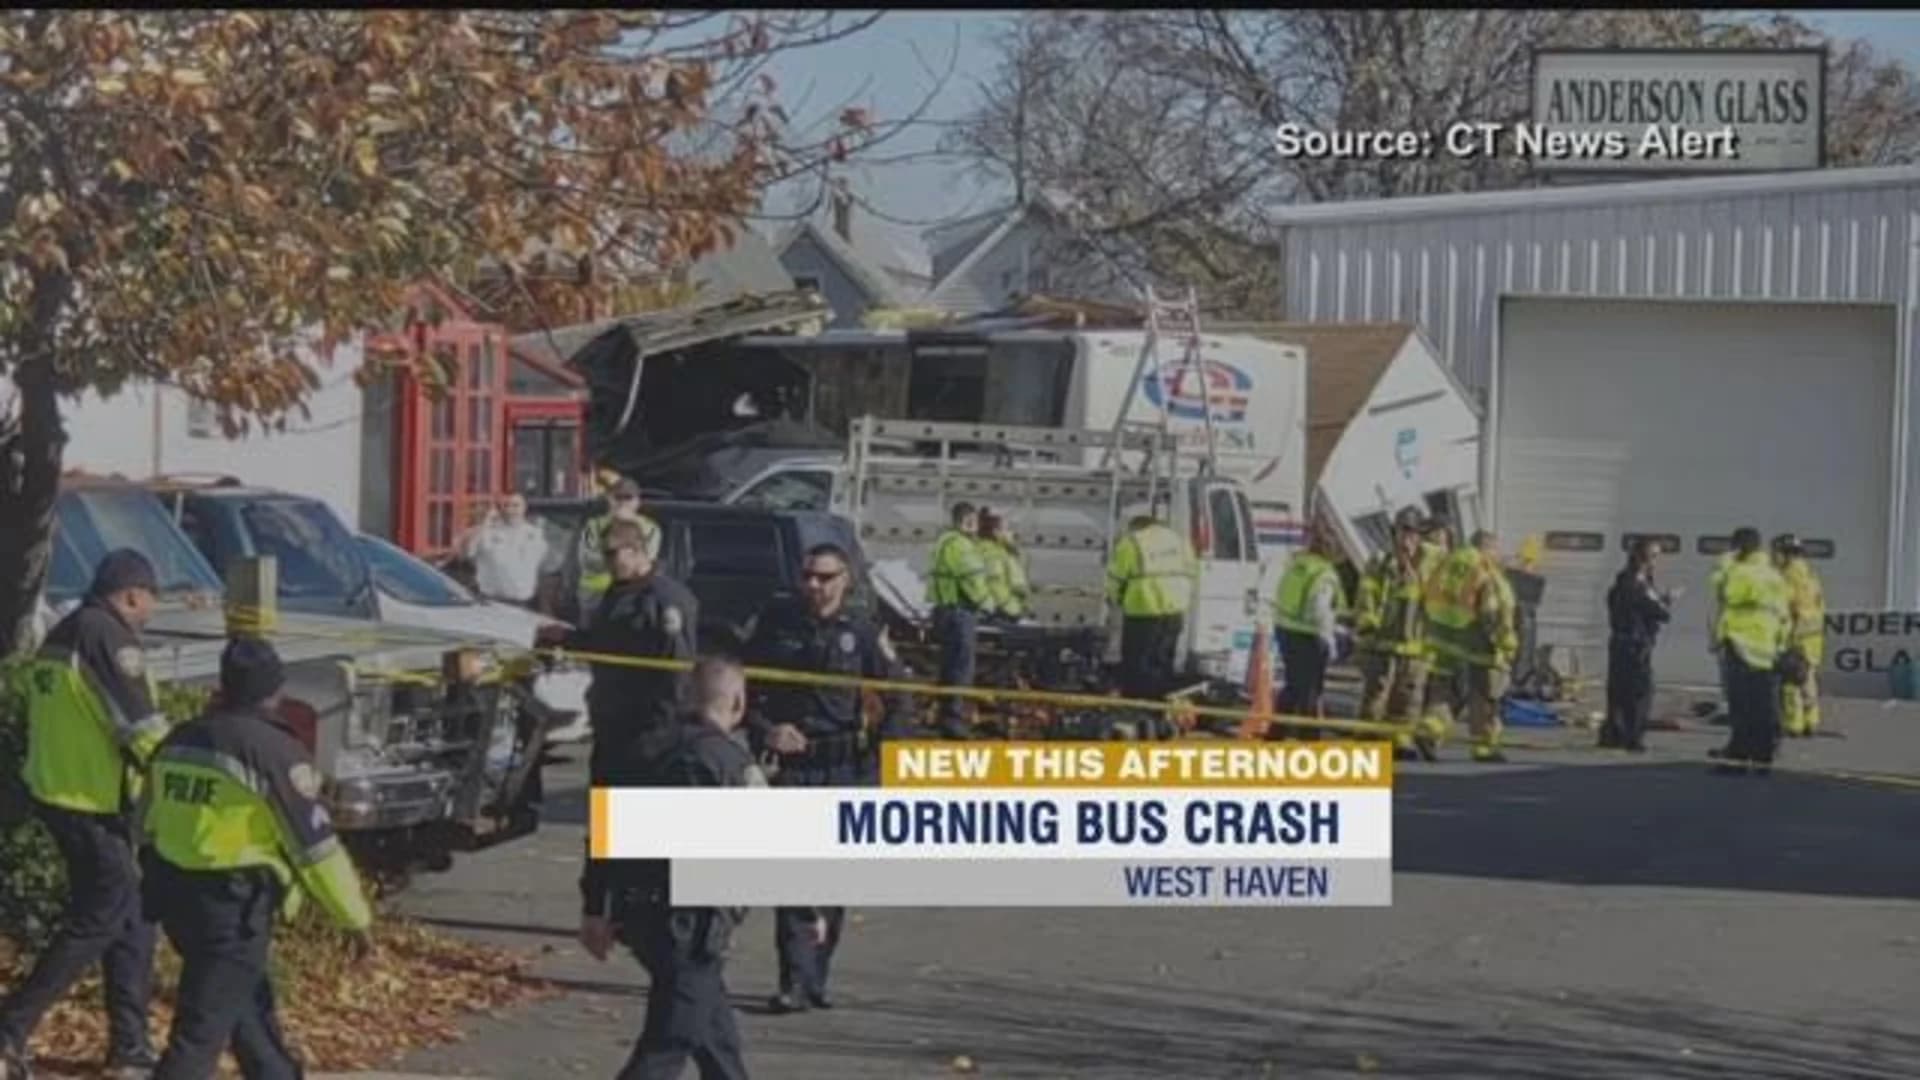 Officials: 4 students suffer minor injuries in bus accident on way to Yale game